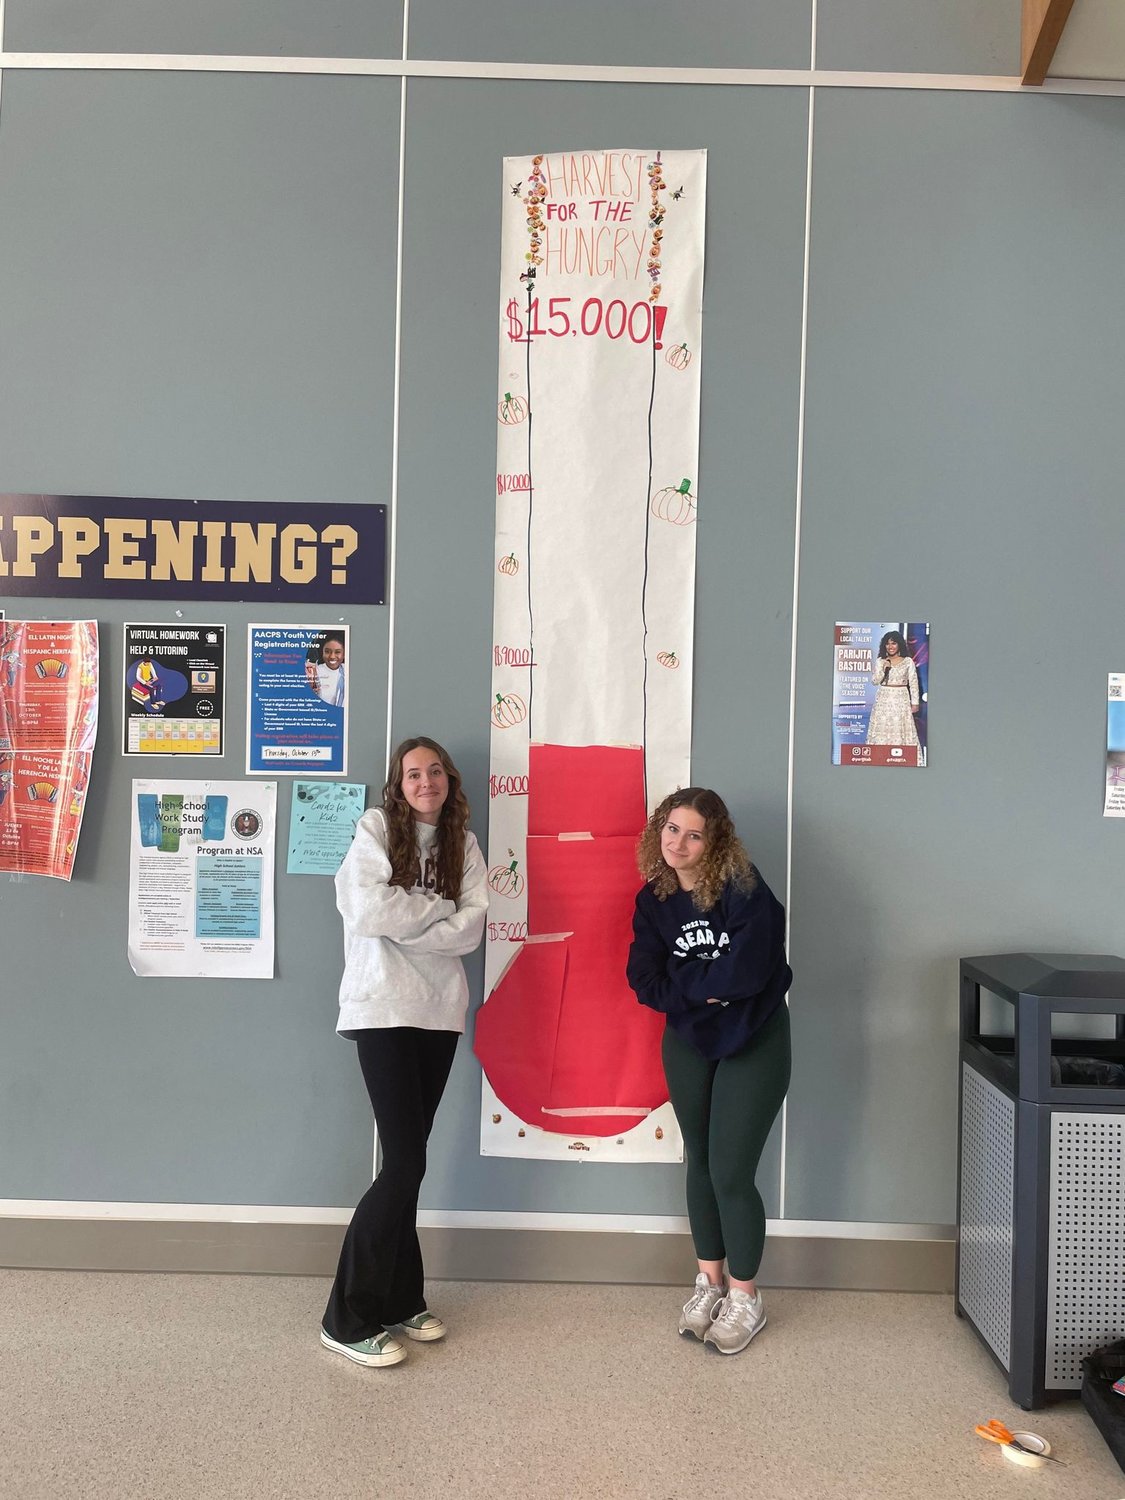 Student leaders Avery Mead and Ruby O'Neill encouraged students to bring their donations. Severna Park was less than halfway to its goal after the second week of October.